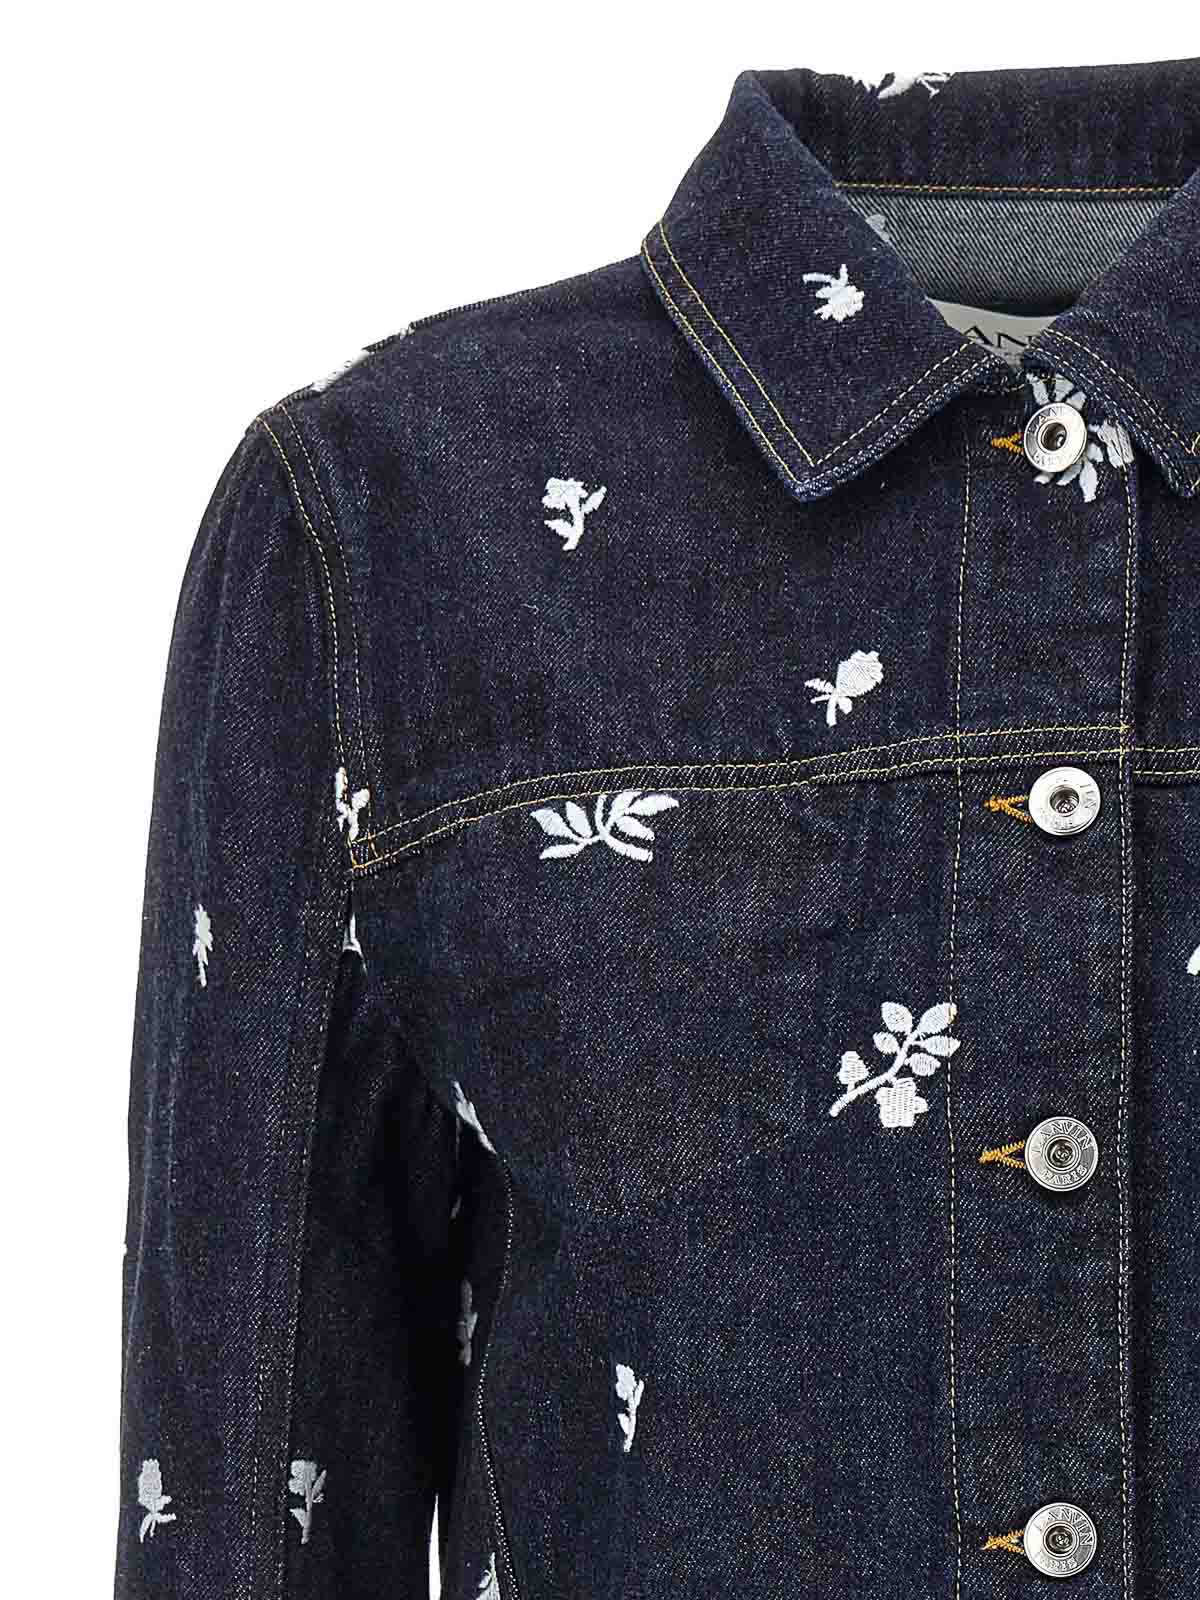 Shop Lanvin Floral Embroidery Jacket In Azul